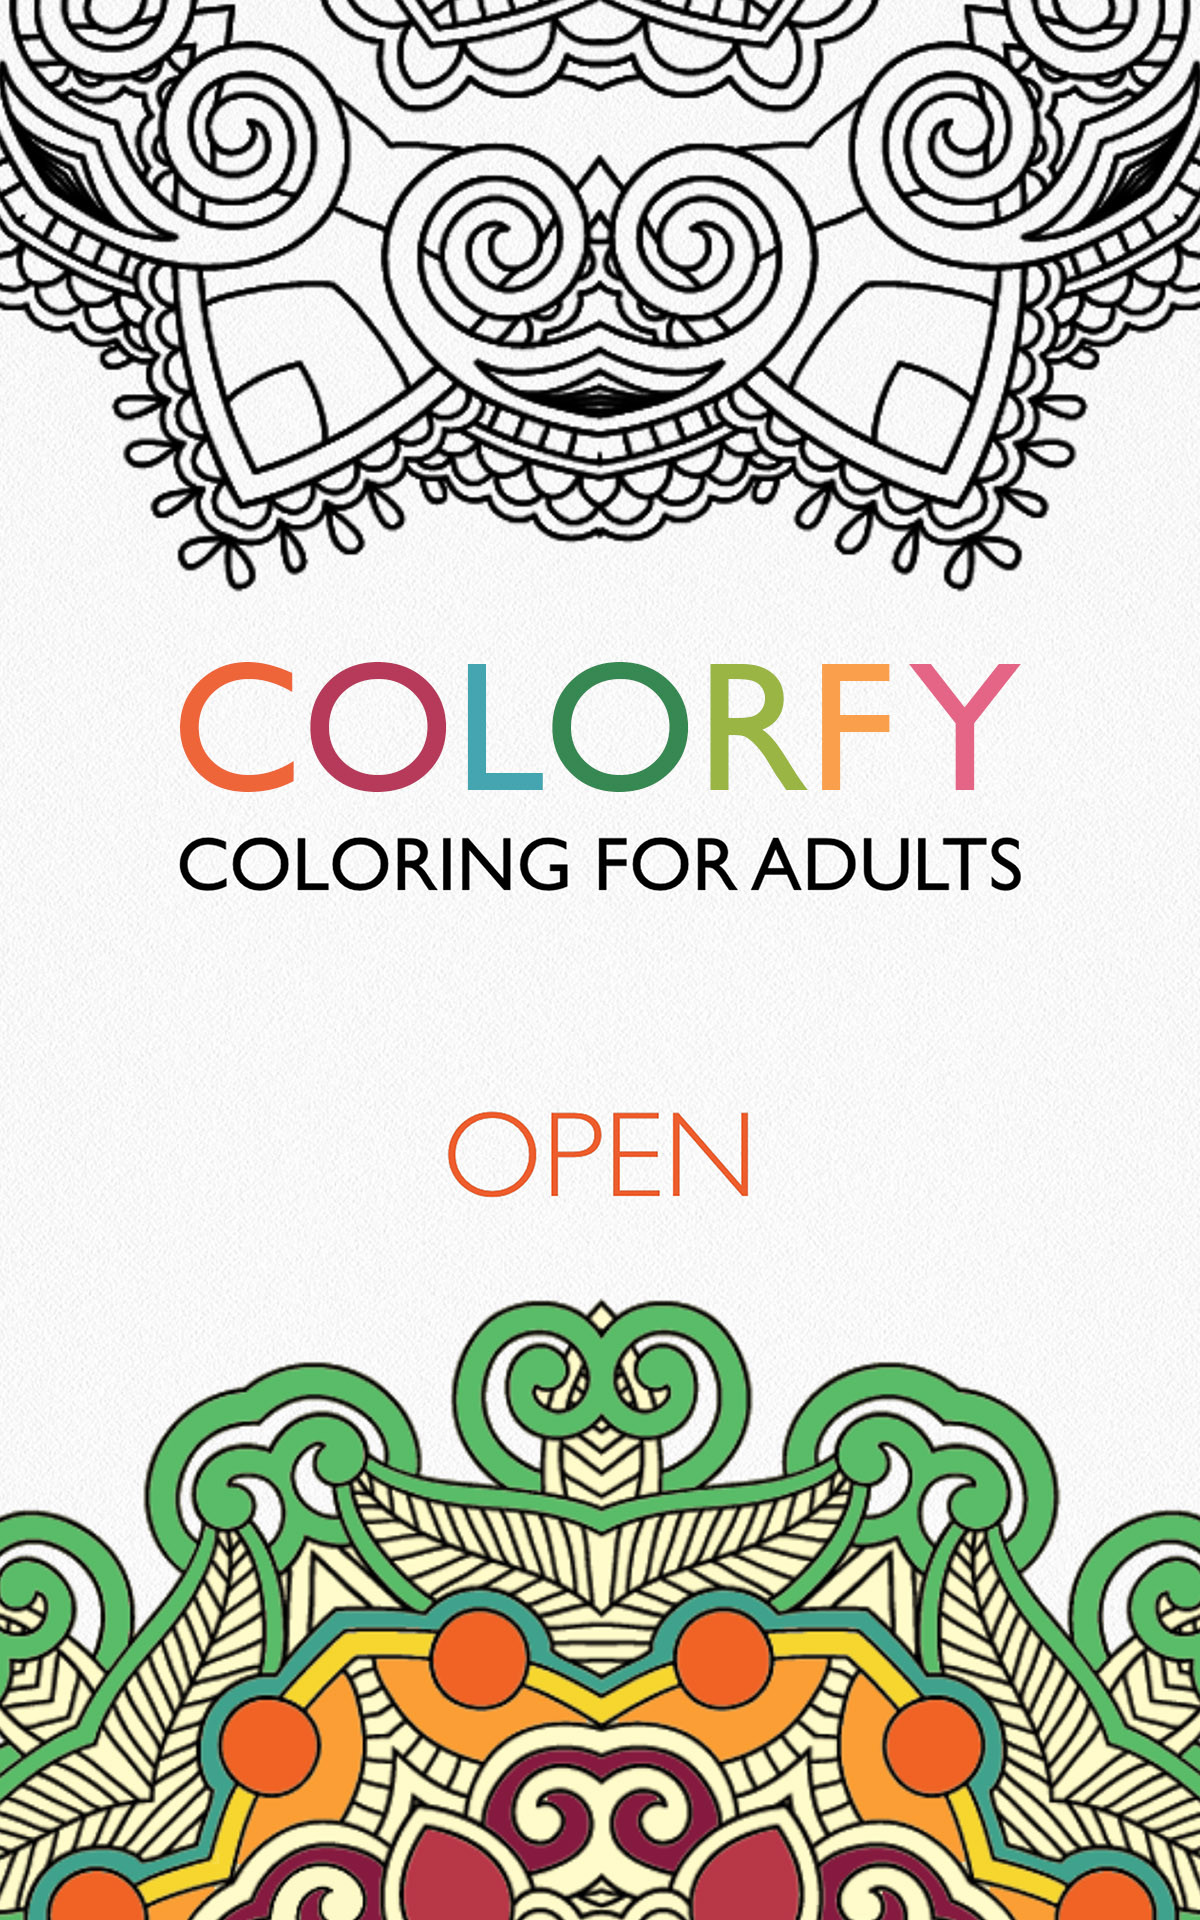 Coloring Book For Adults Amazon
 Amazon Colorfy Coloring Book for Adults Free